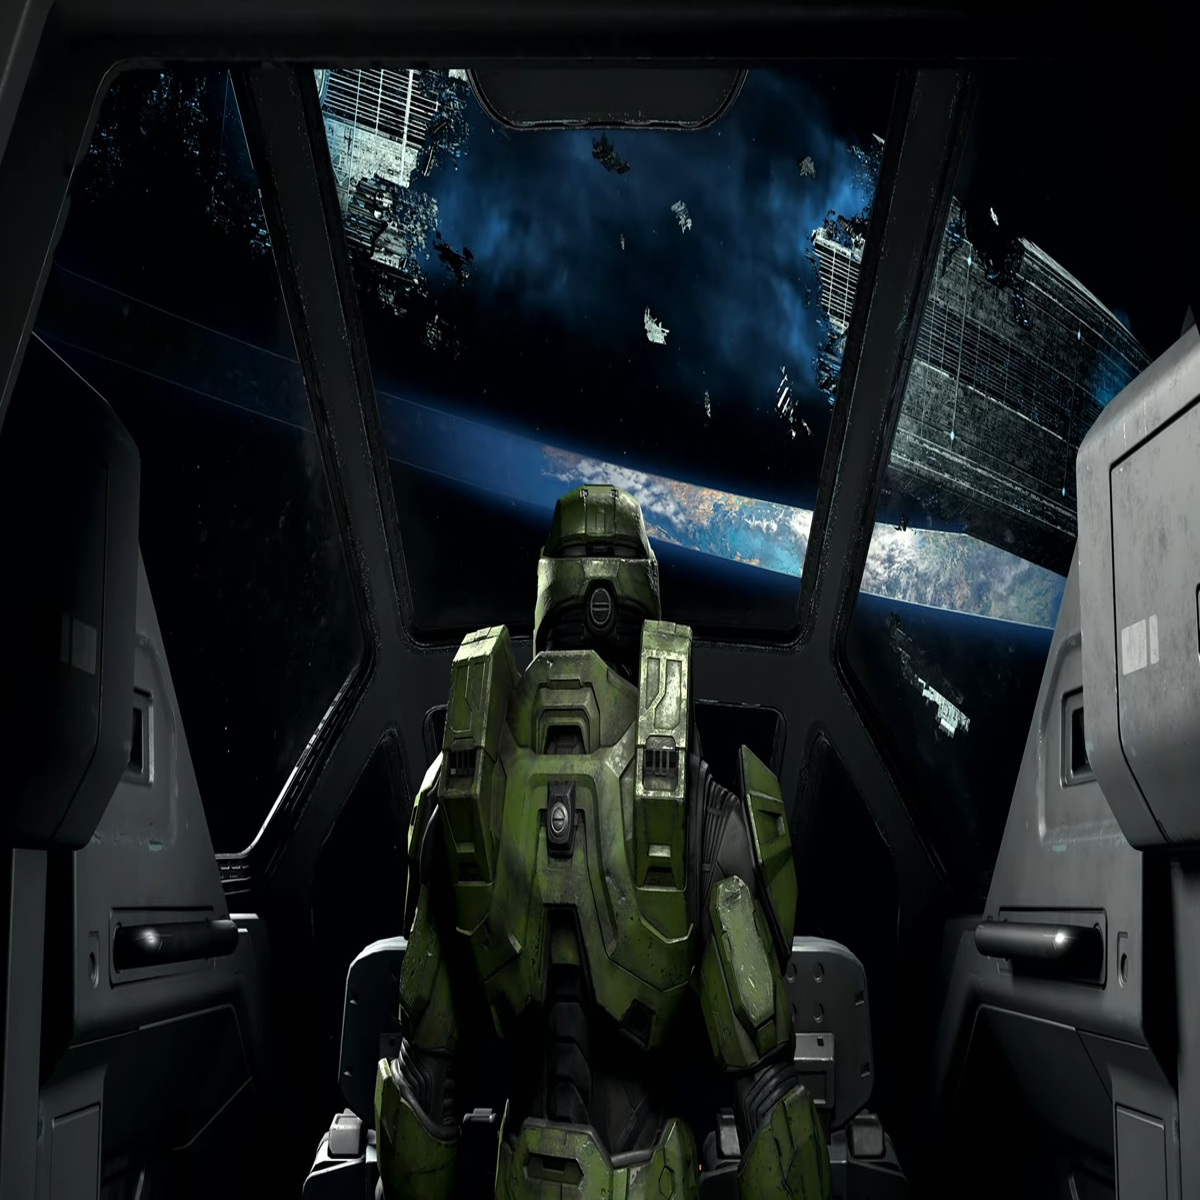 New live action trailer for 'Halo: Reach', The Independent